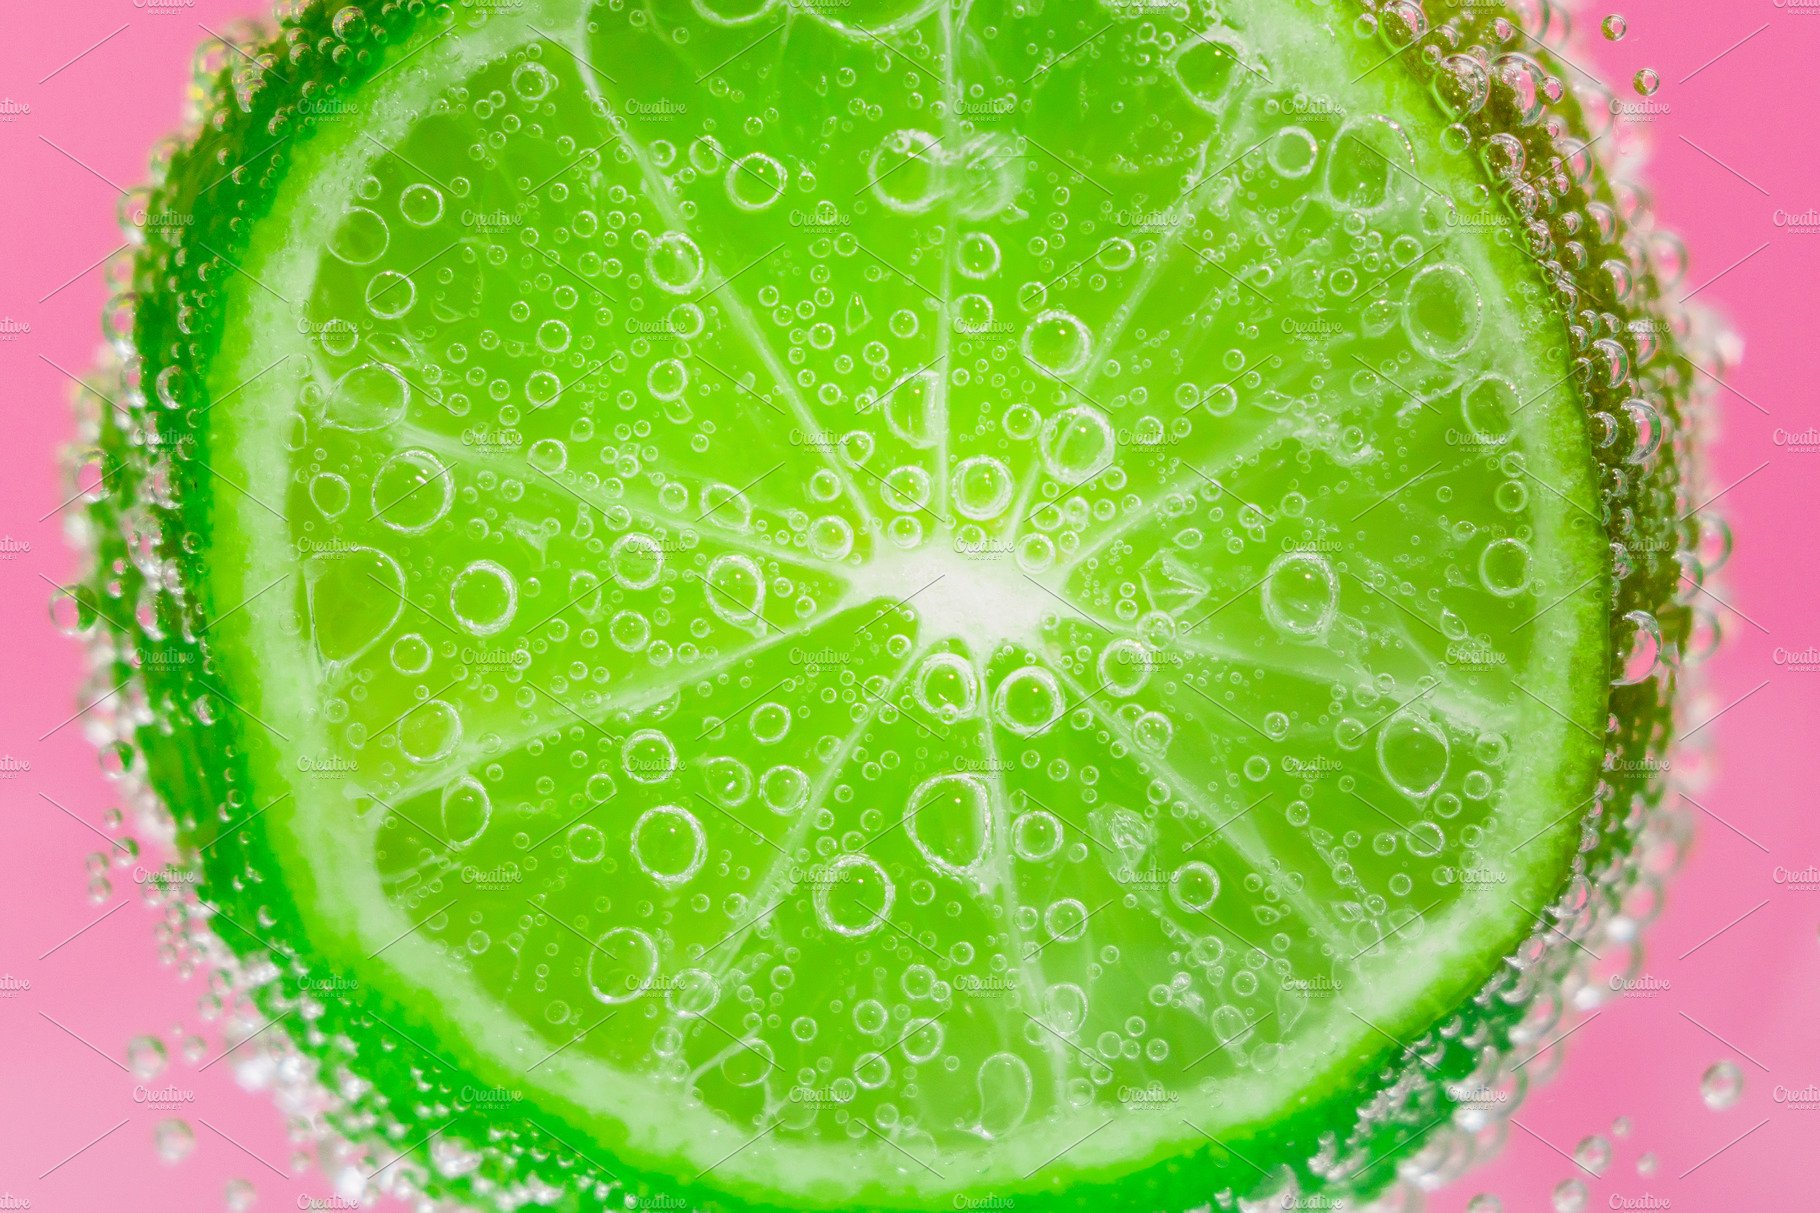 lime fruits in water under water cover image.